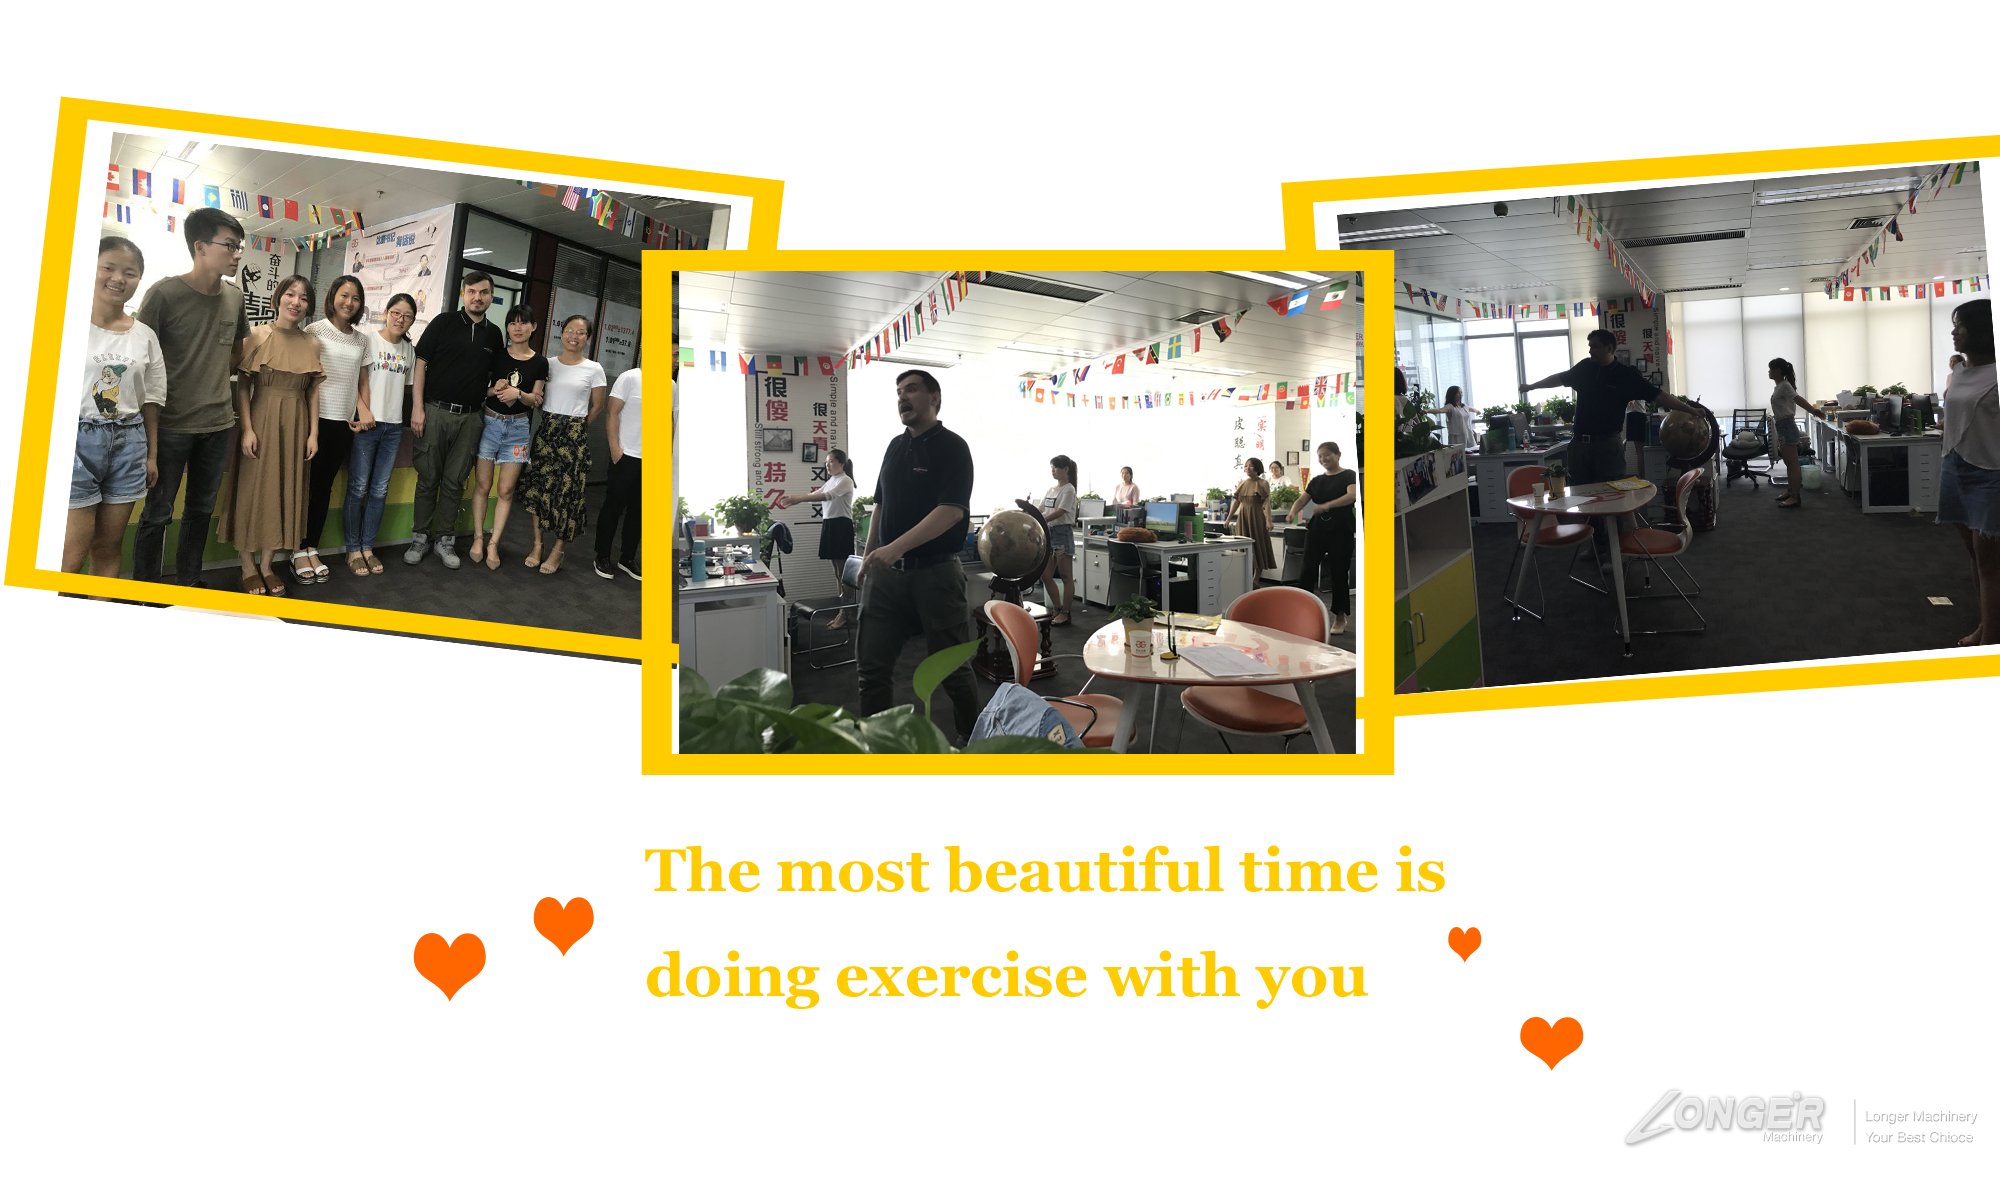 do exercise with the customer from Canada